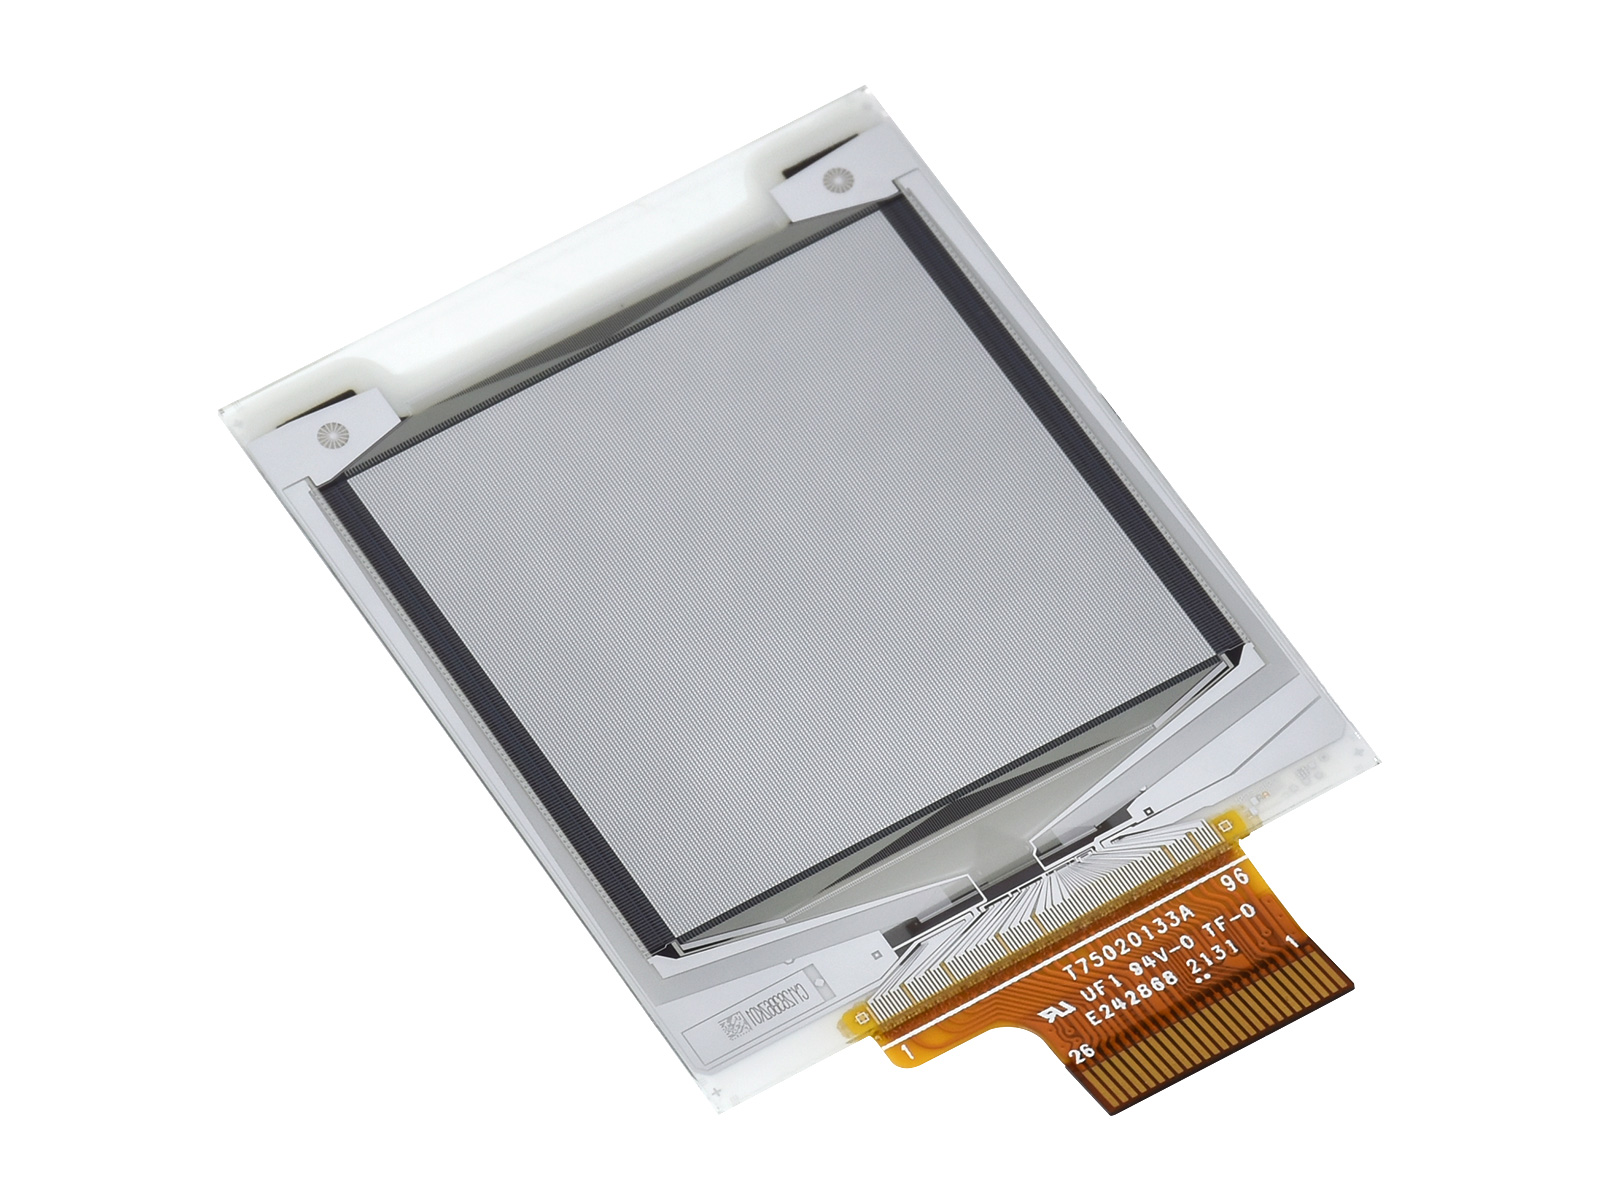 1.64inch square E-Paper (G) raw display, 168 * 168, Red/Yellow/Black/White